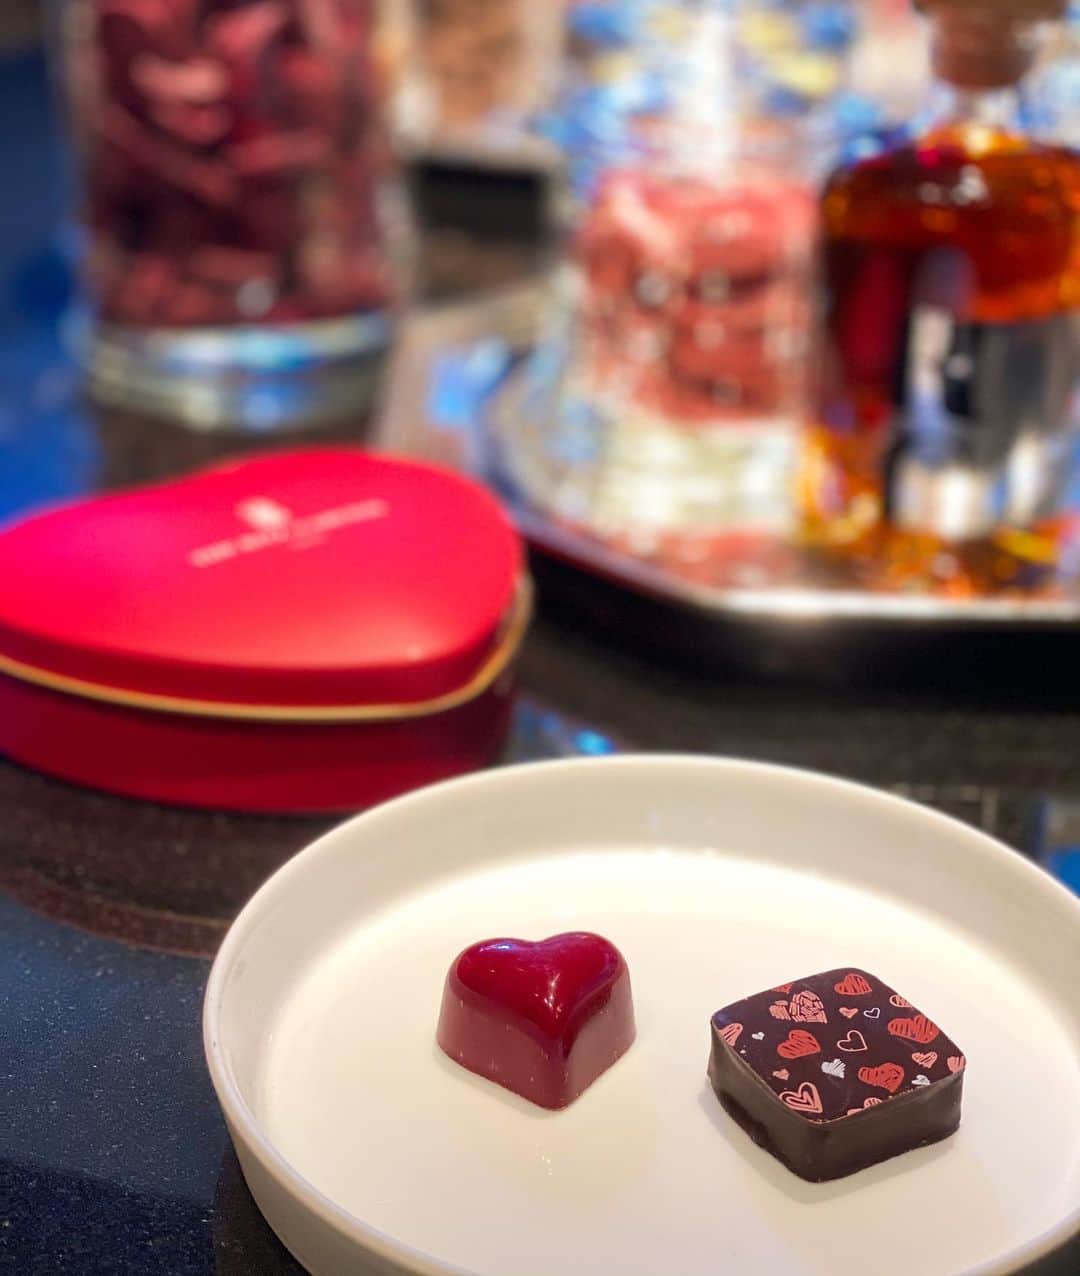 The Ritz-Carlton, Tokyoのインスタグラム：「バレンタインデーまであと半月！ザ・リッツ・カールトン カフェ＆デリの真っ赤なハート型缶入りオリジナルチョコレートに想いを乗せて。﻿ ﻿ Valentine’s Day is two weeks away! Find the ultimate Valentine’s Day gift at The Ritz-Carlton Café & Deli, where offers a broad selection of gift items from original chocolates to Valentine's Day hamper.﻿ #RitzCarltonTokyo #RCMemories﻿」